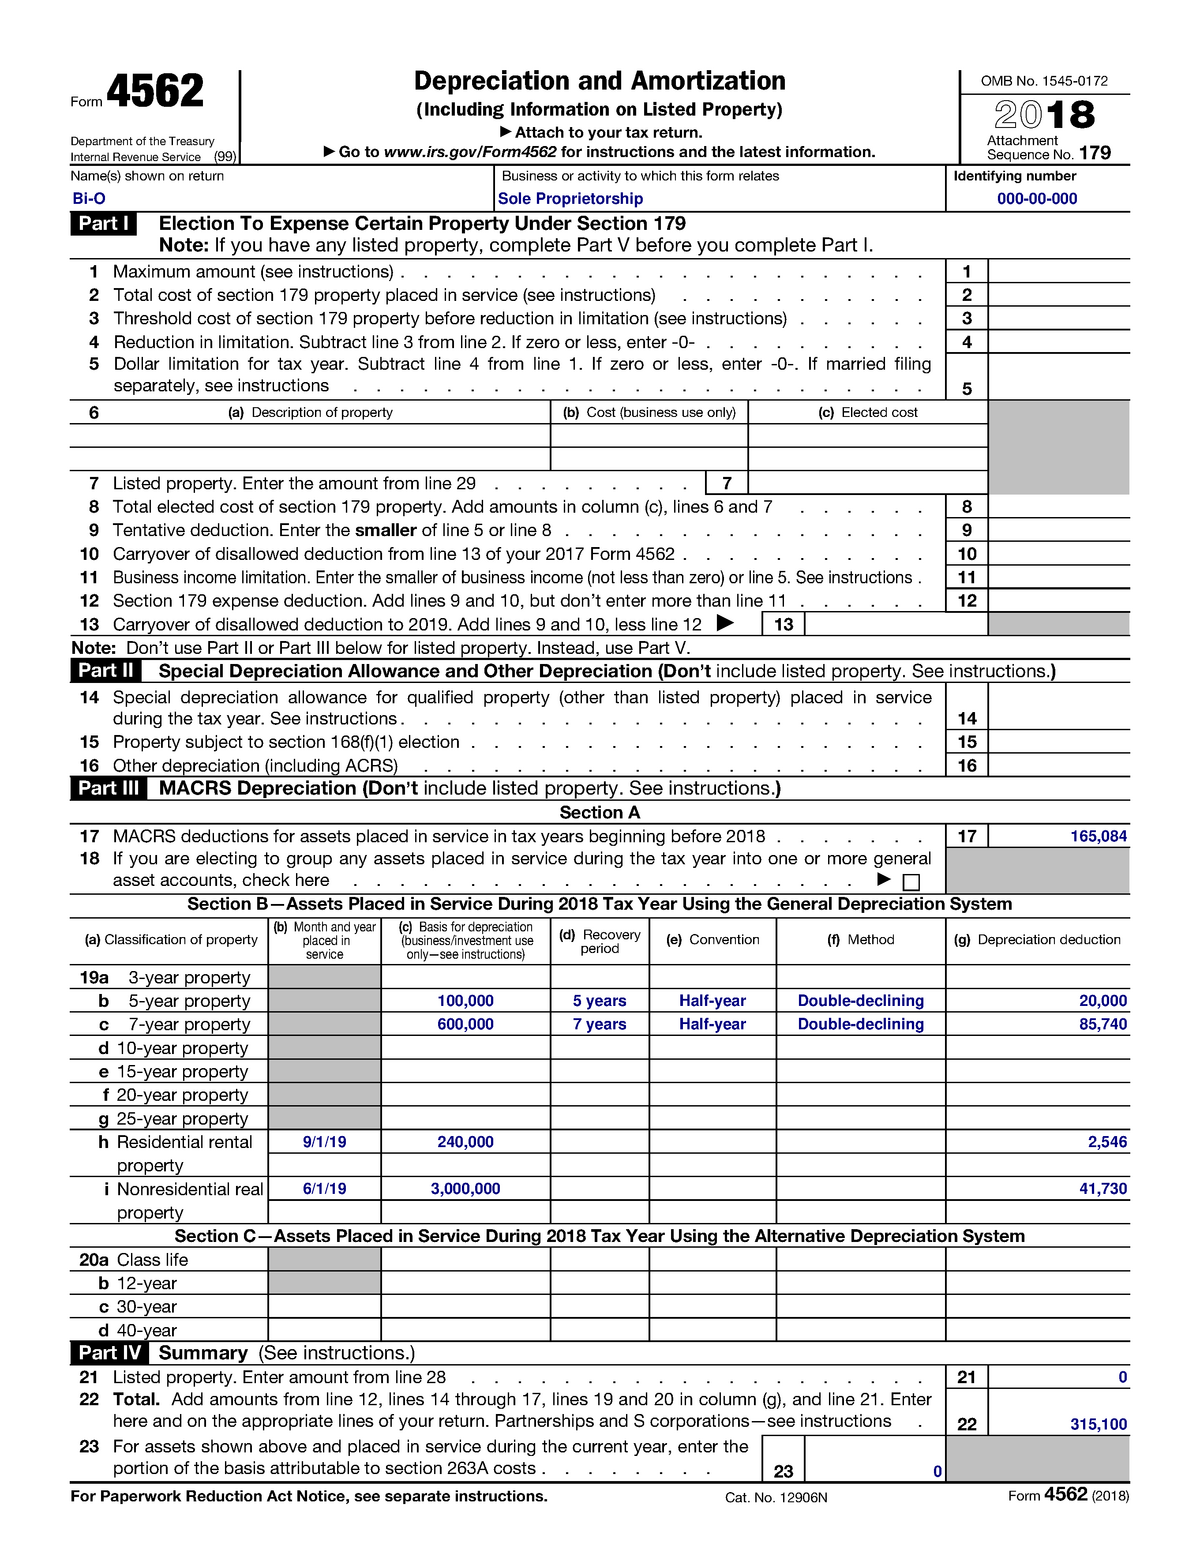 Form 4562 Final This Document has the filled out Form 4562 for the